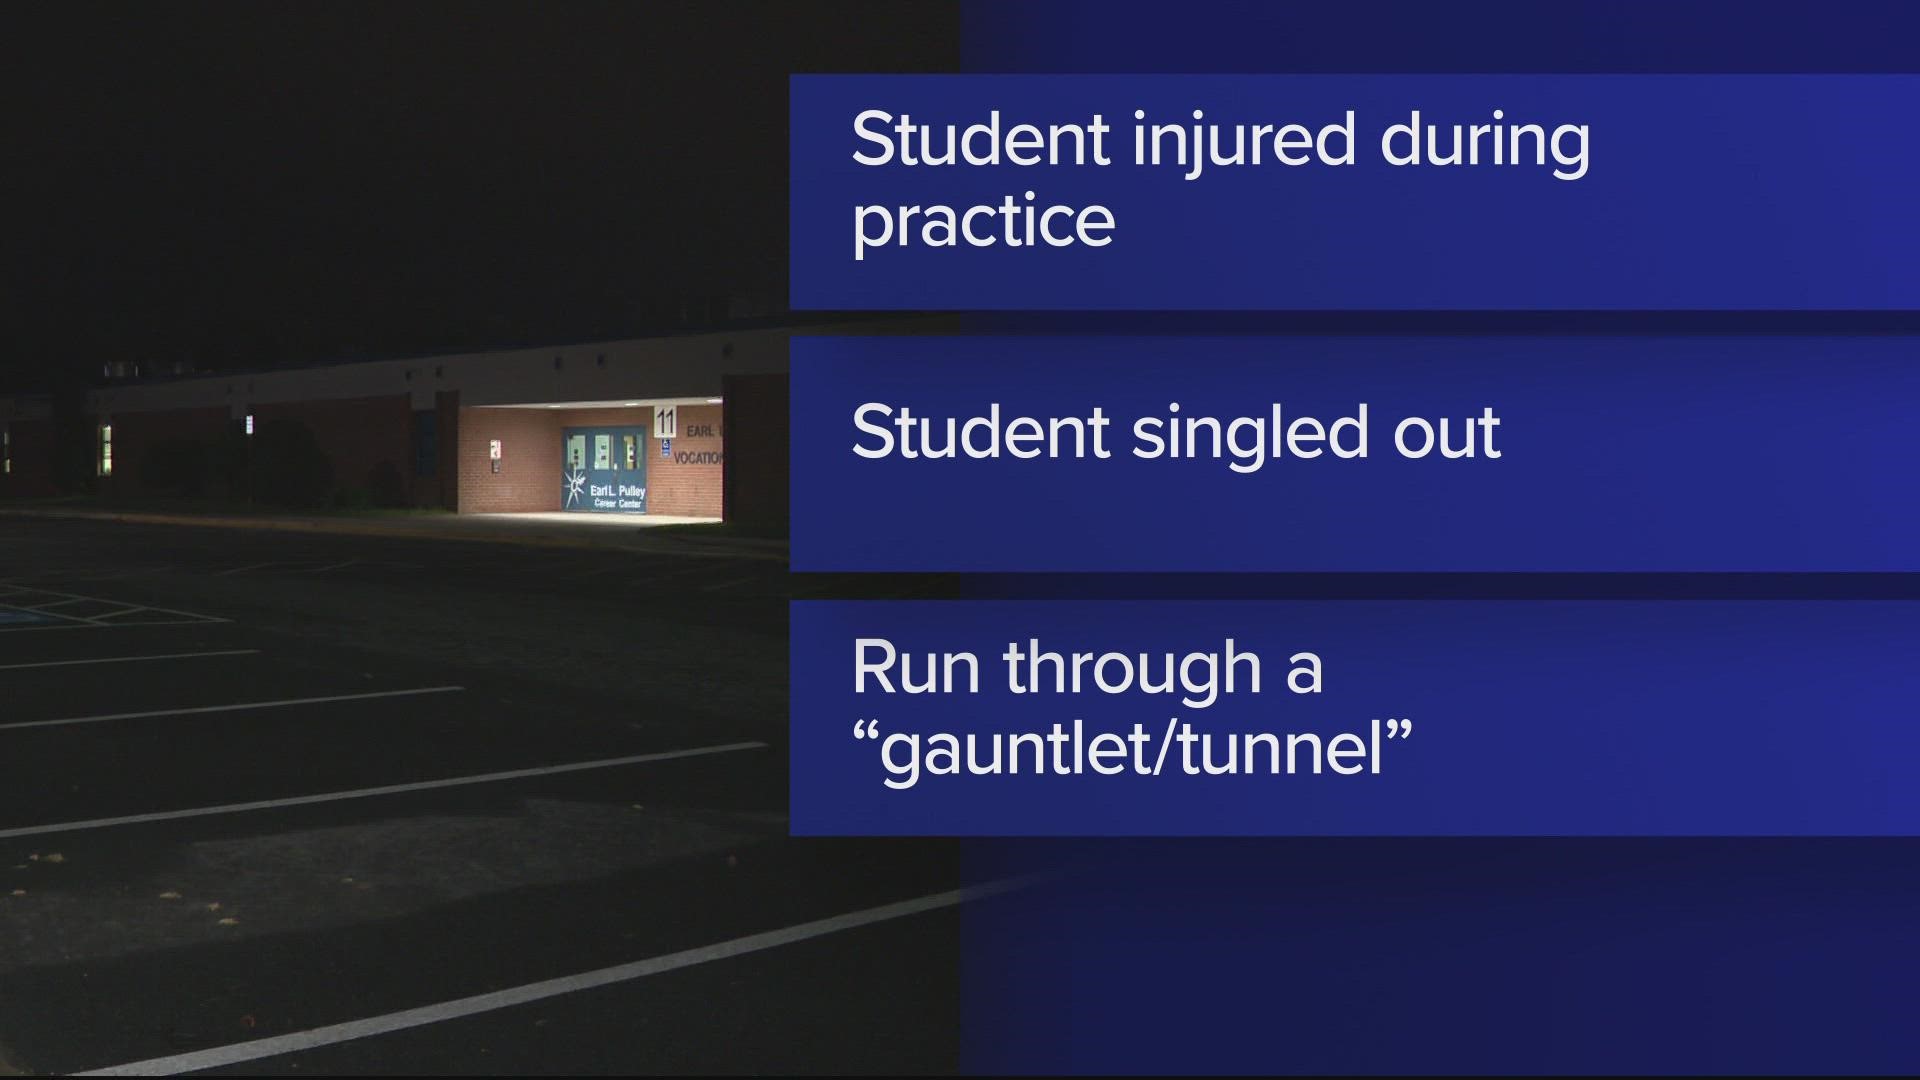 A parent reported that a student was singled out by coaches and was injured while running through a "gauntlet/tunnel," at West Potomac High School.